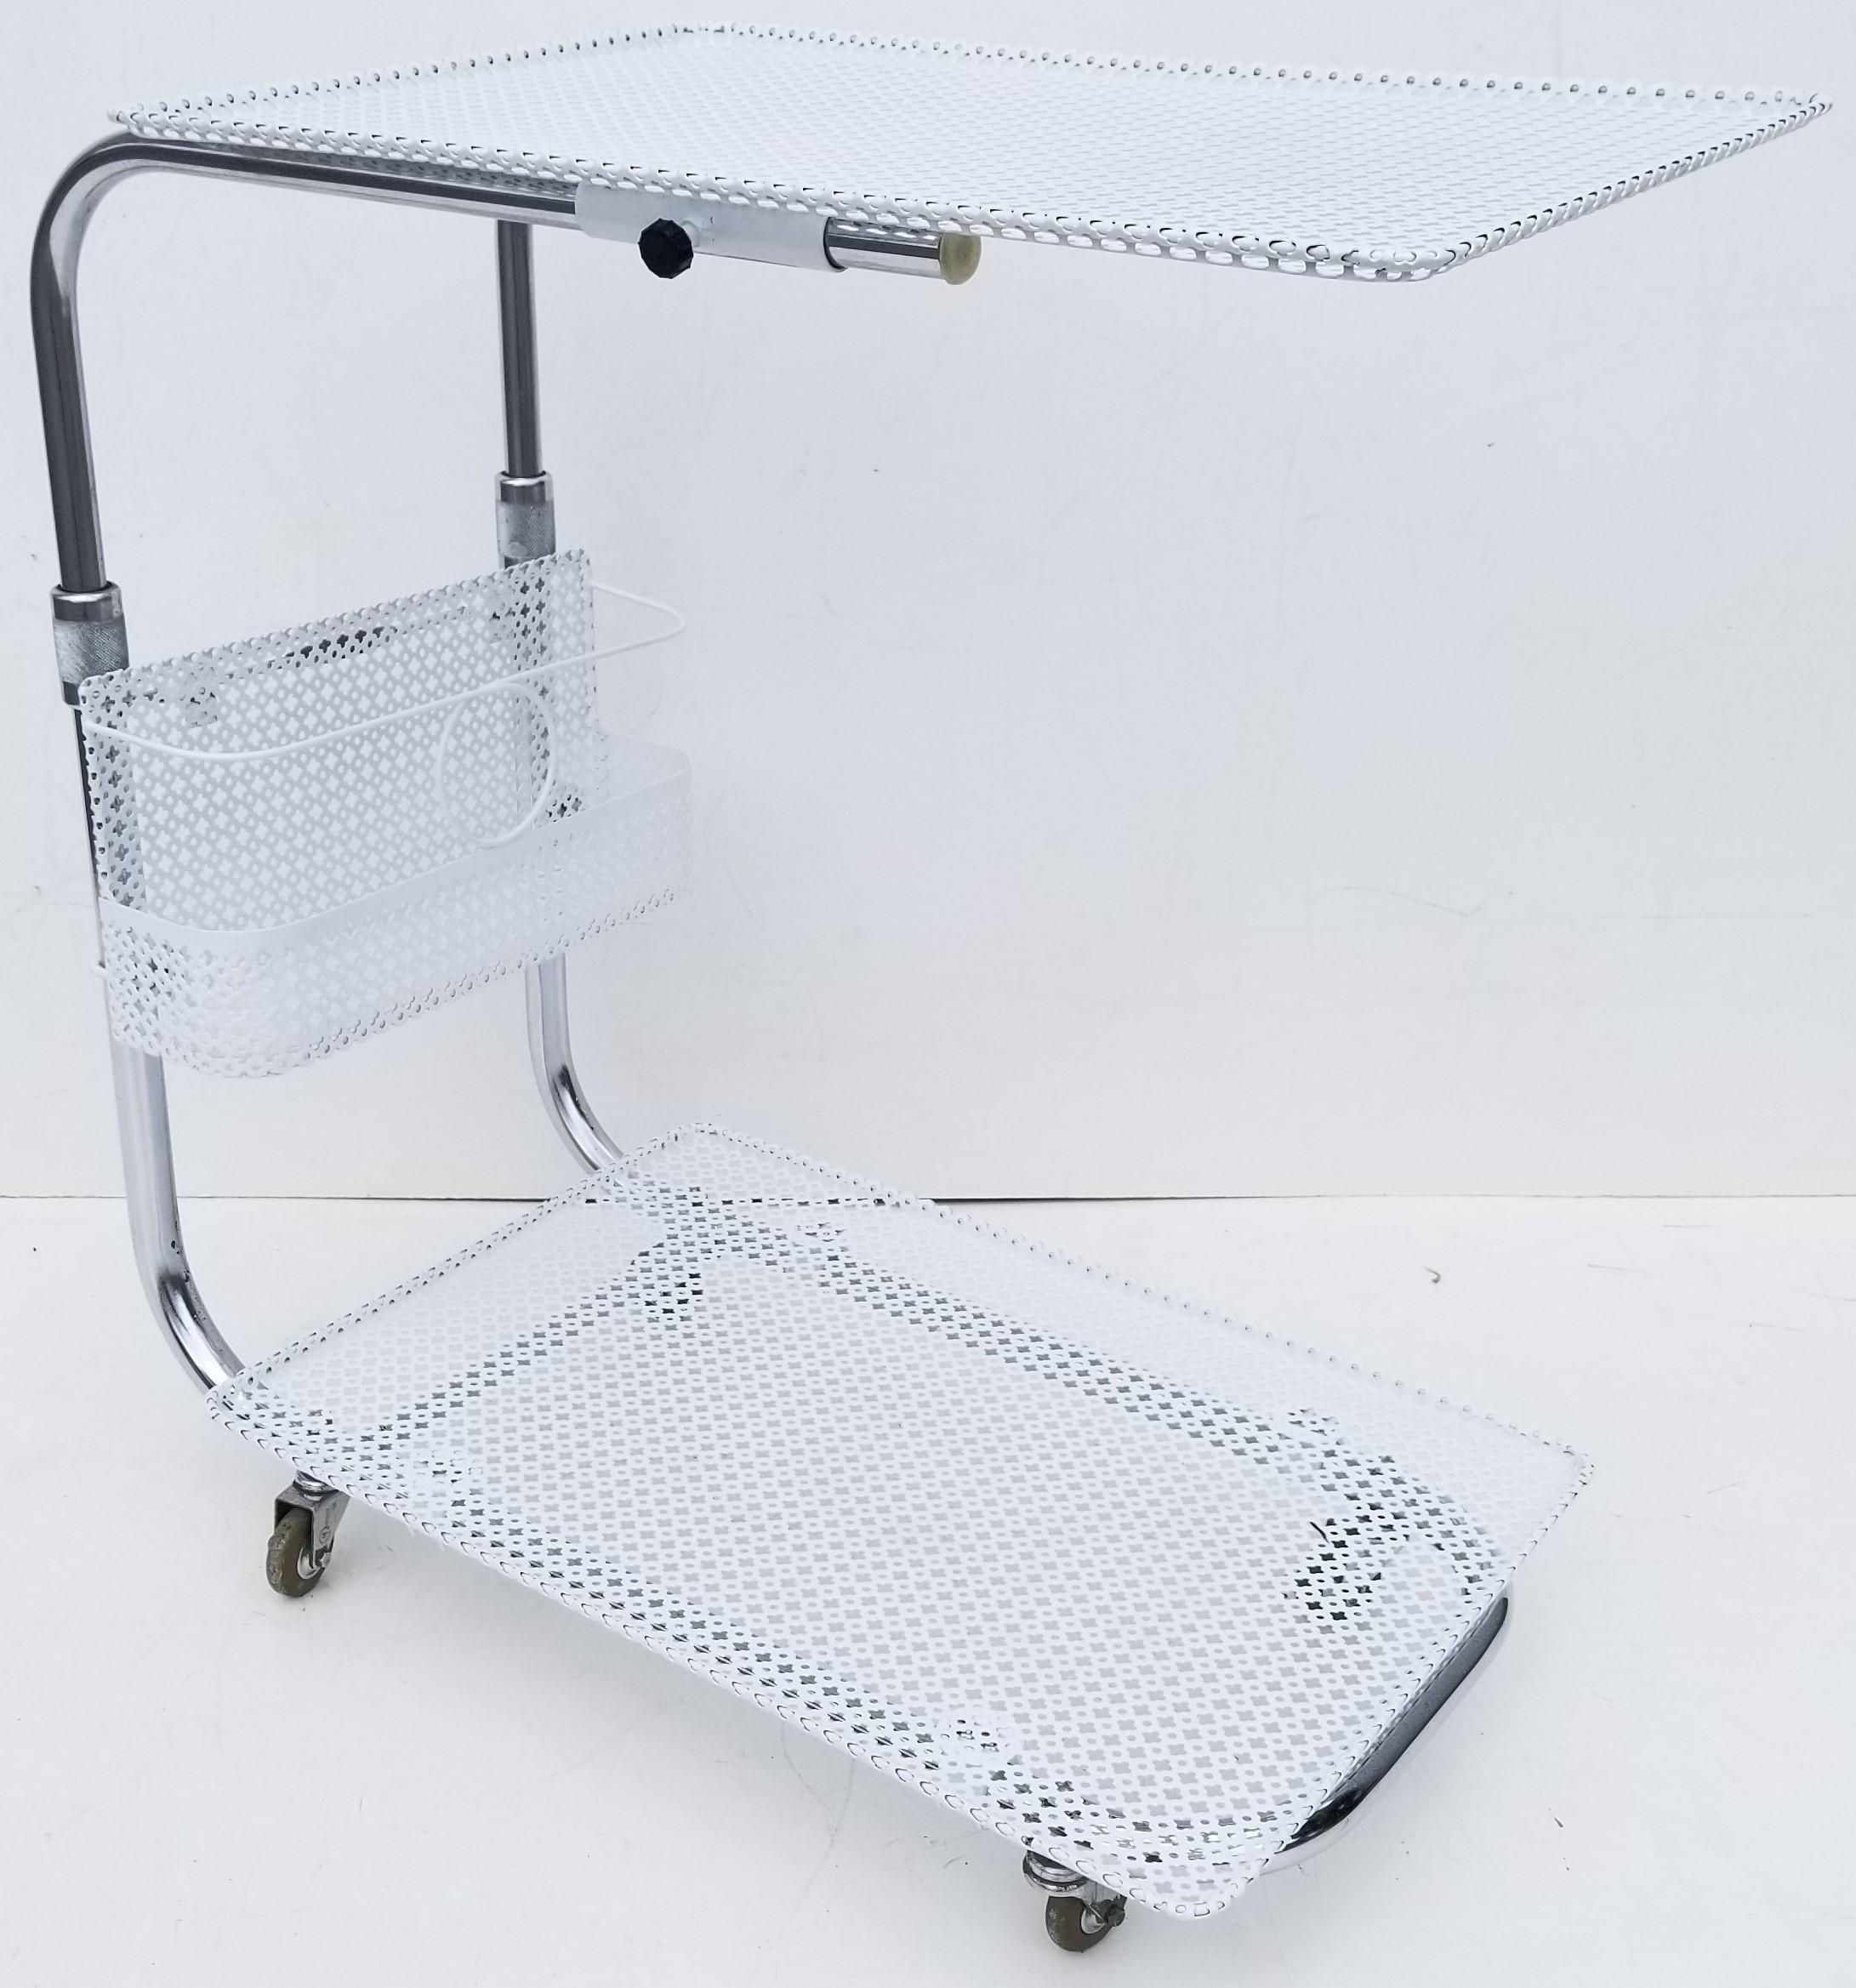 French Mid-Century Modern Bar Cart, Serving Cart by Mathieu Matégot, L'adapt-bar, signed and numbered. 
Features a polished Steel Frame with 2 tier fine wire mesh Tray and comes with a bottle Holder.
On all original Casters which run